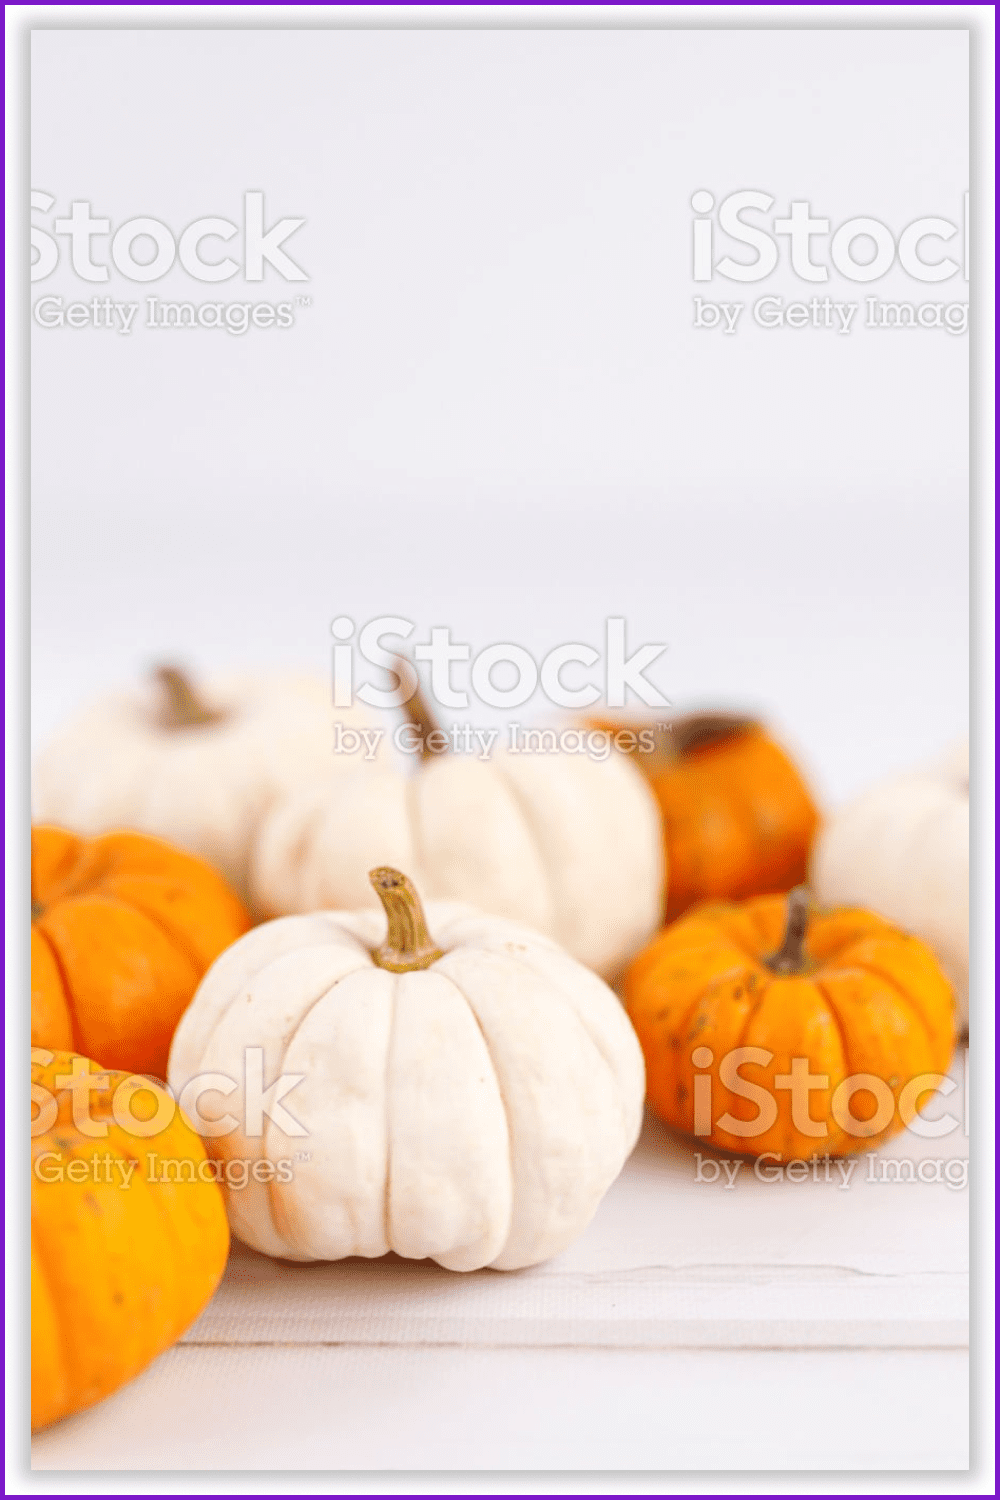 Image of decorated yellow and white pumplins on white background.